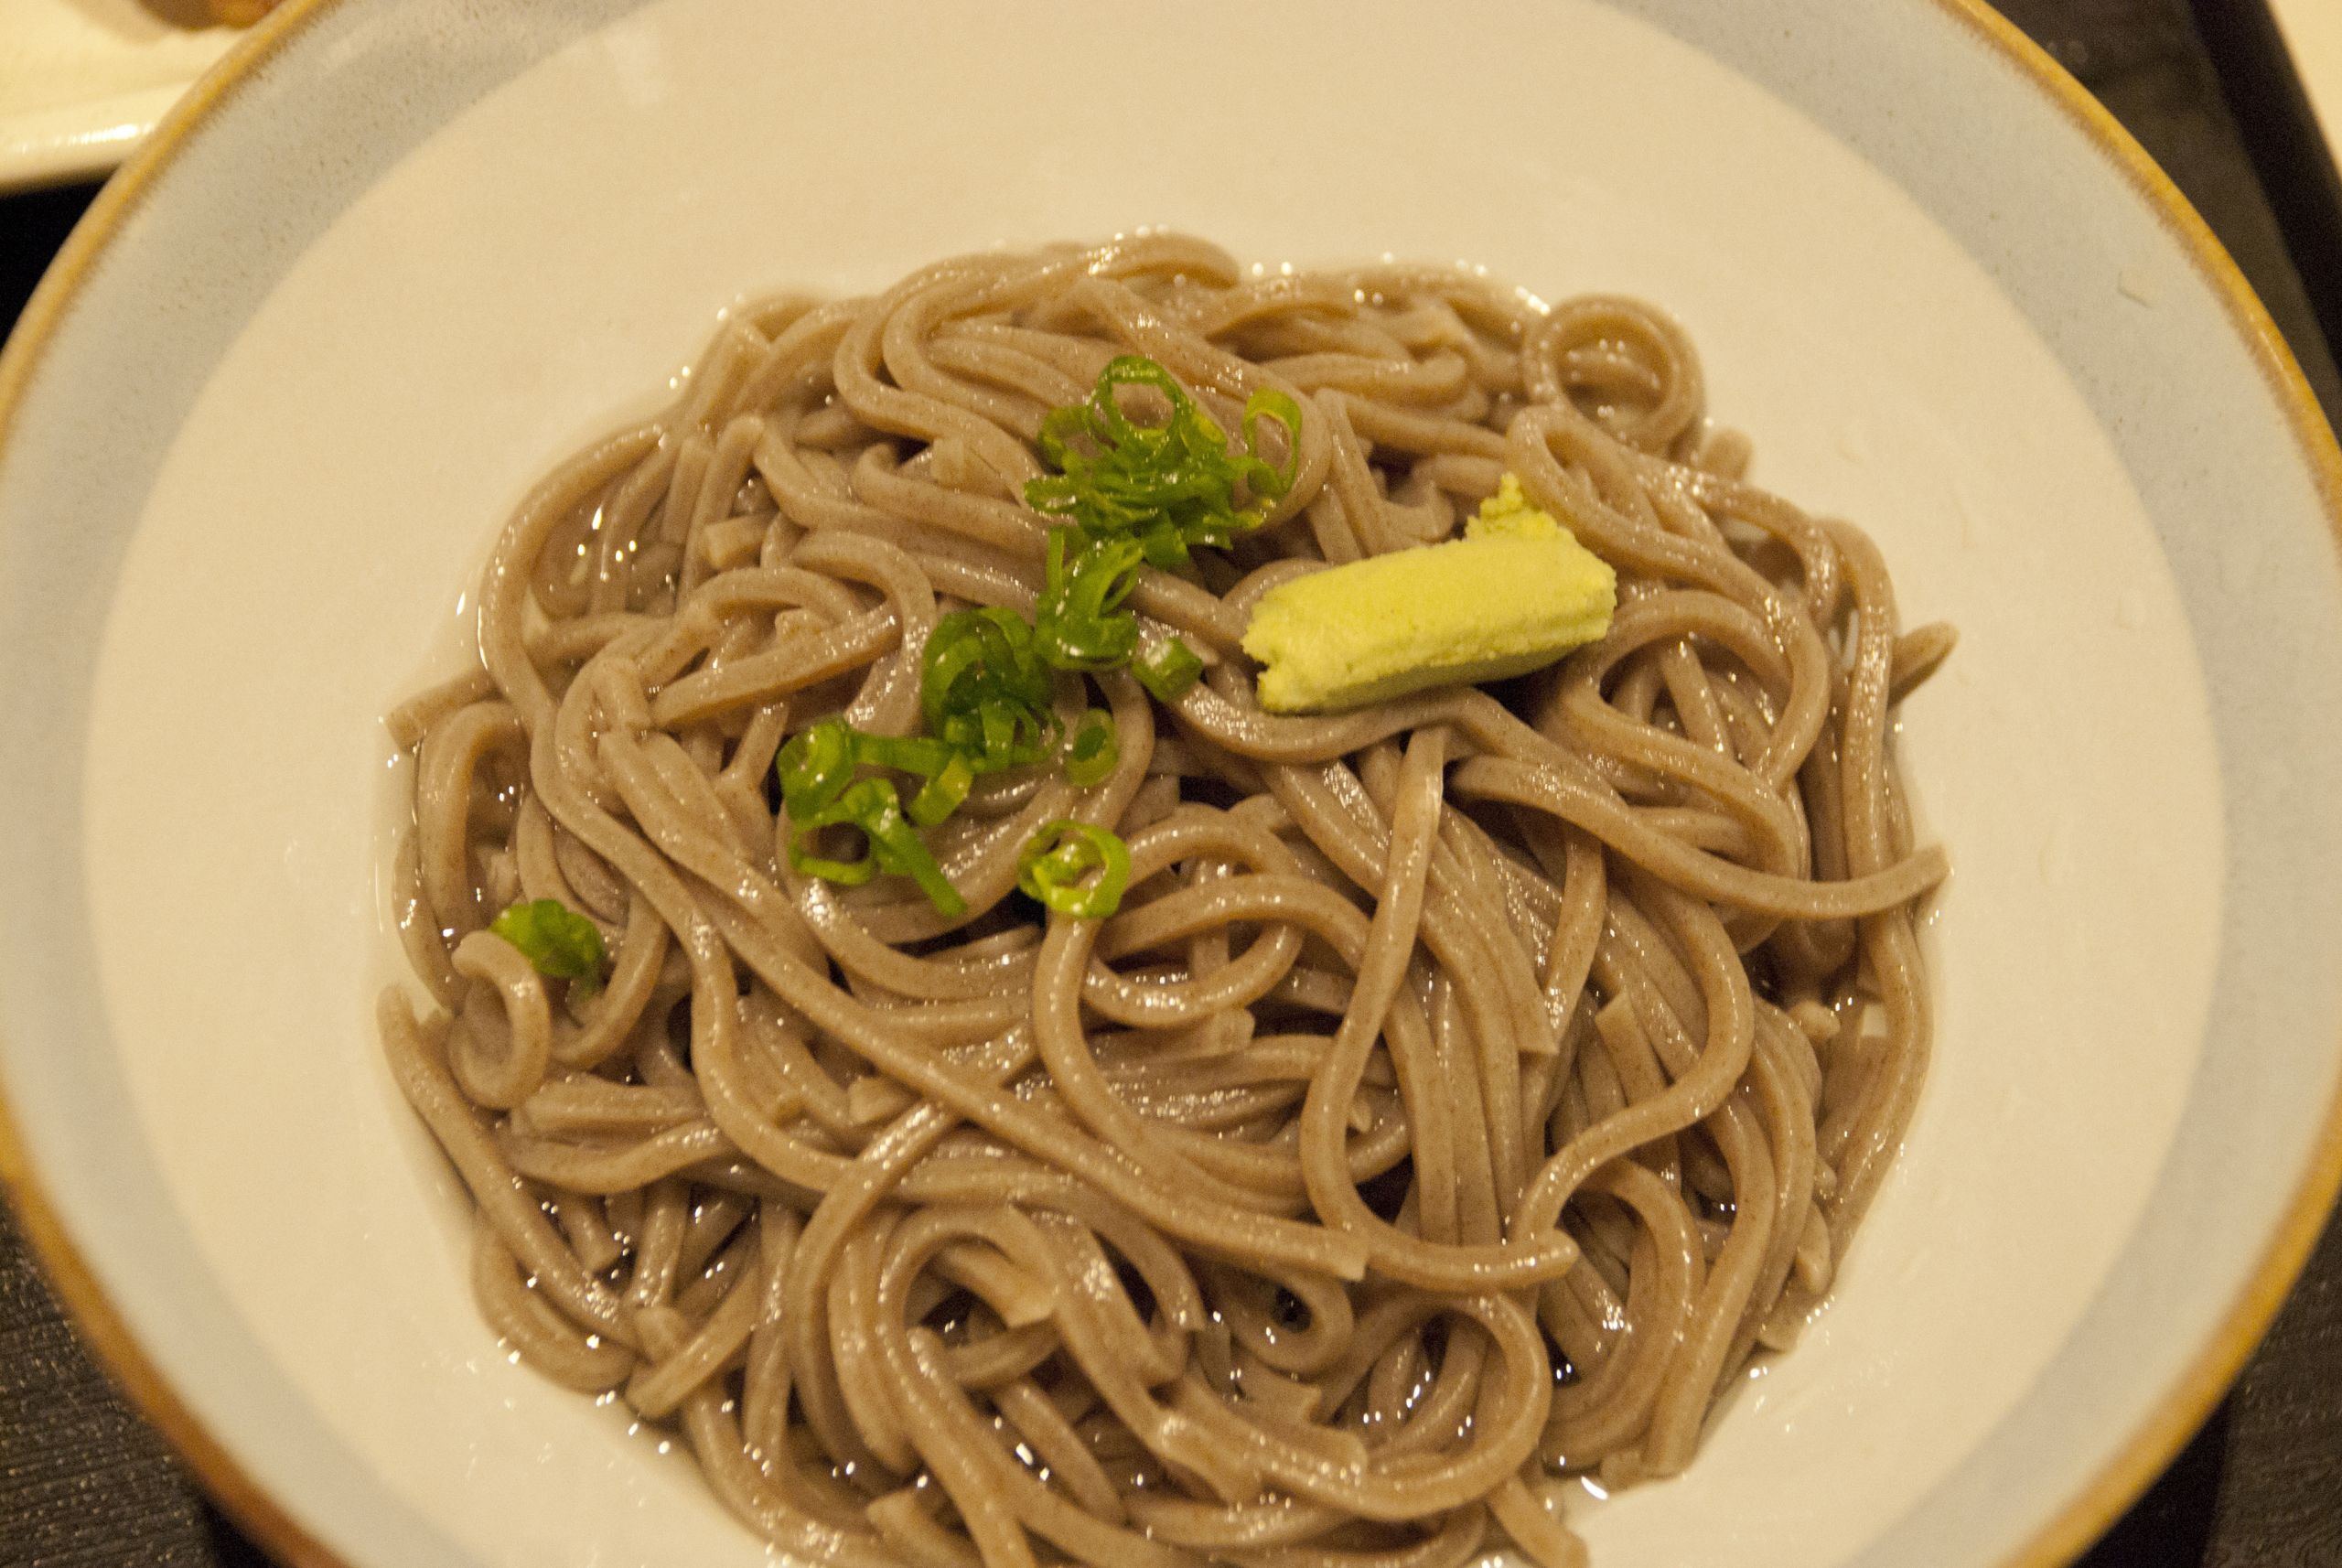 The Best Ideas for Japanese Buckwheat Noodles Home Family Style and